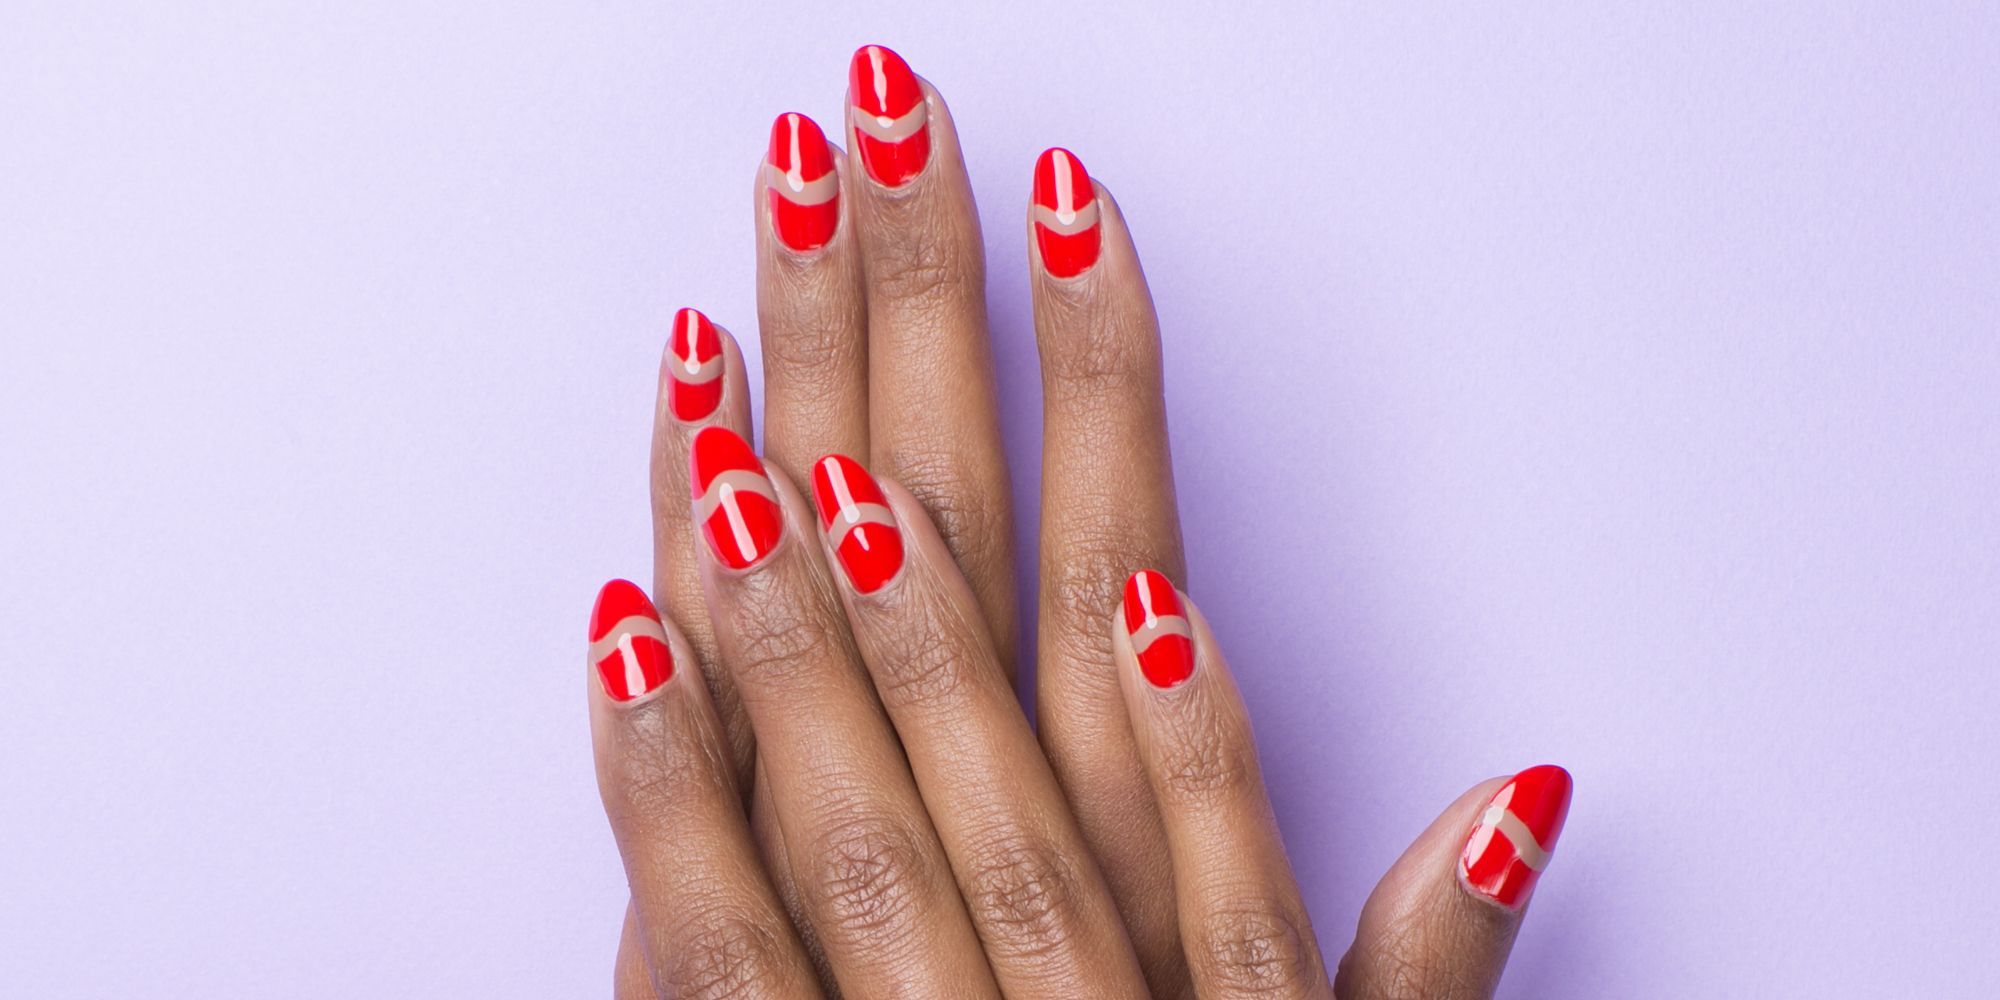 Red Nails Stock Photos and Images - 123RF